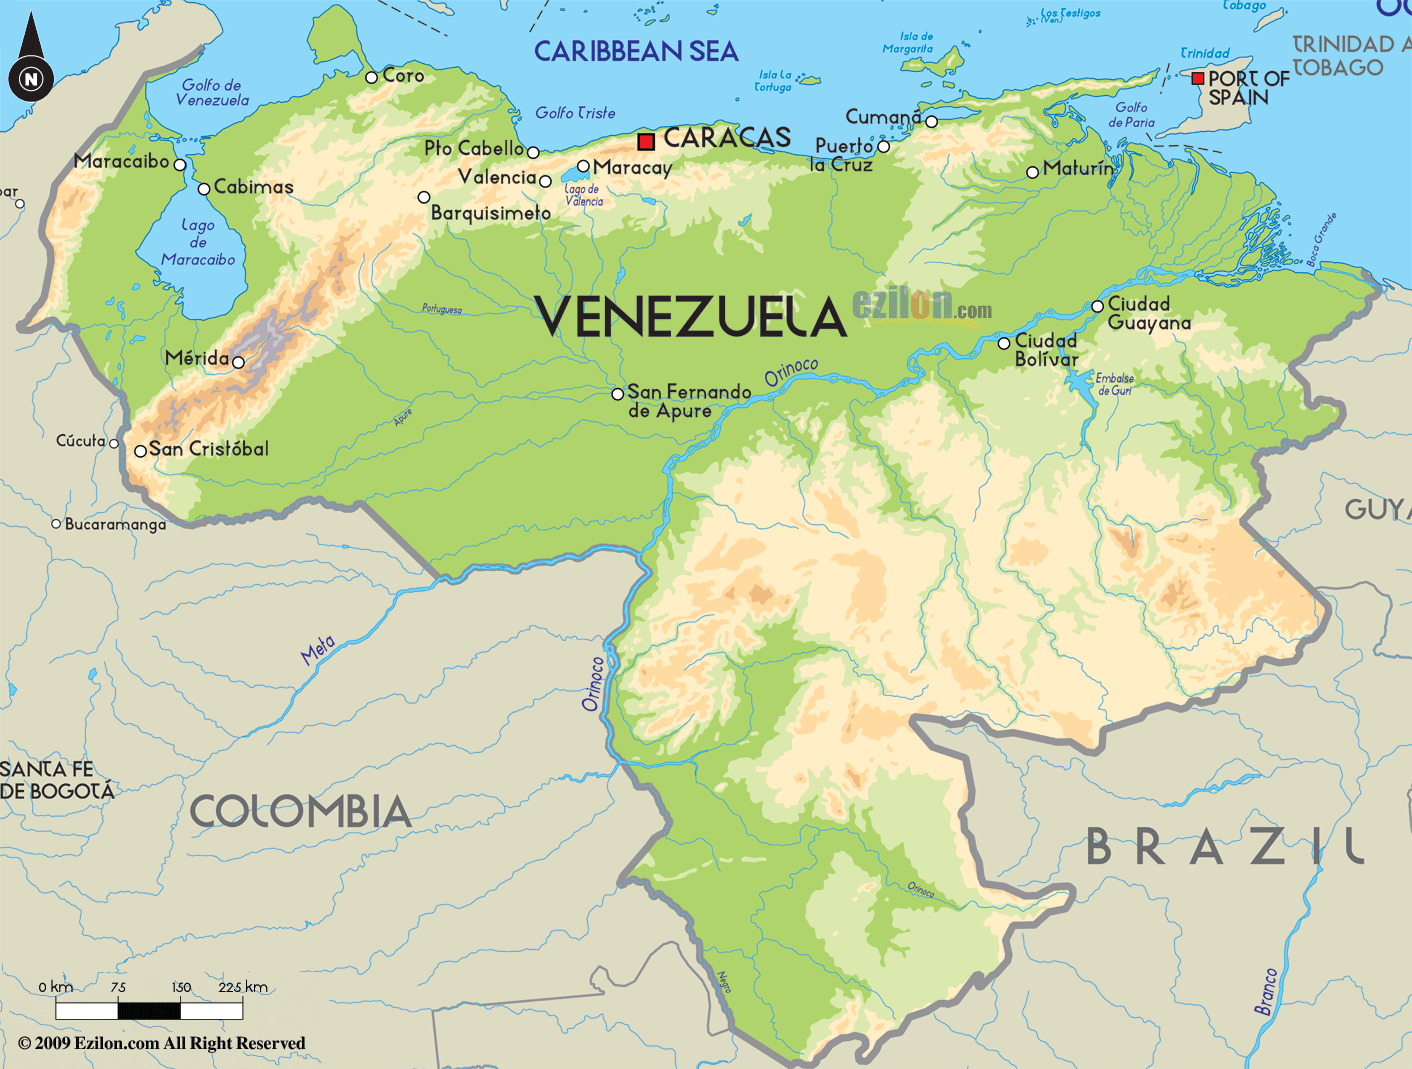 Geography | Venezuela and Climate Change